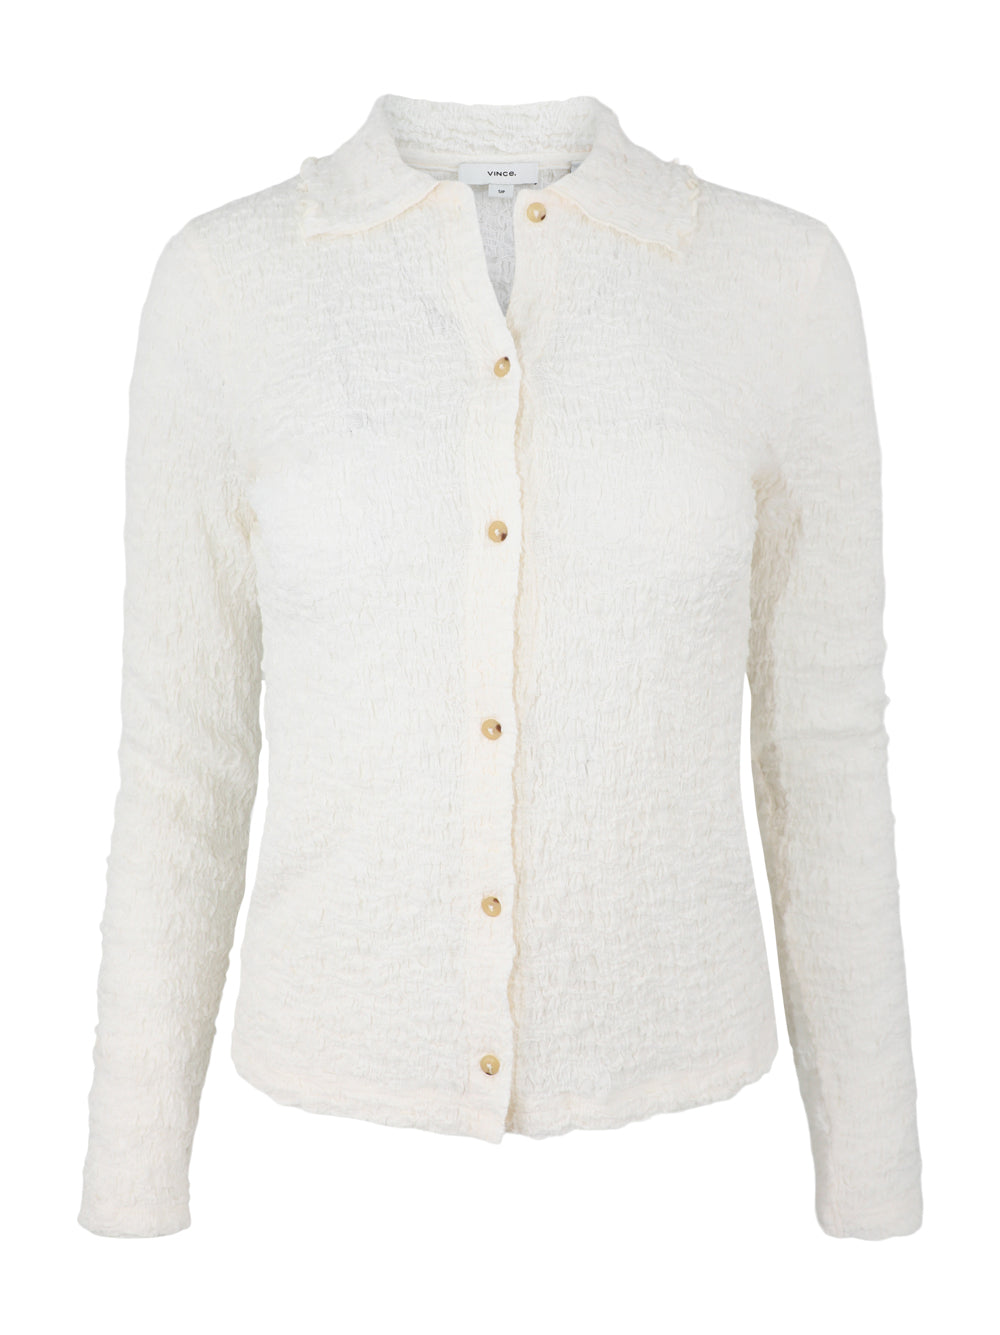 Vince Smocked Long-Sleeve Button Up Shirt in Gesso